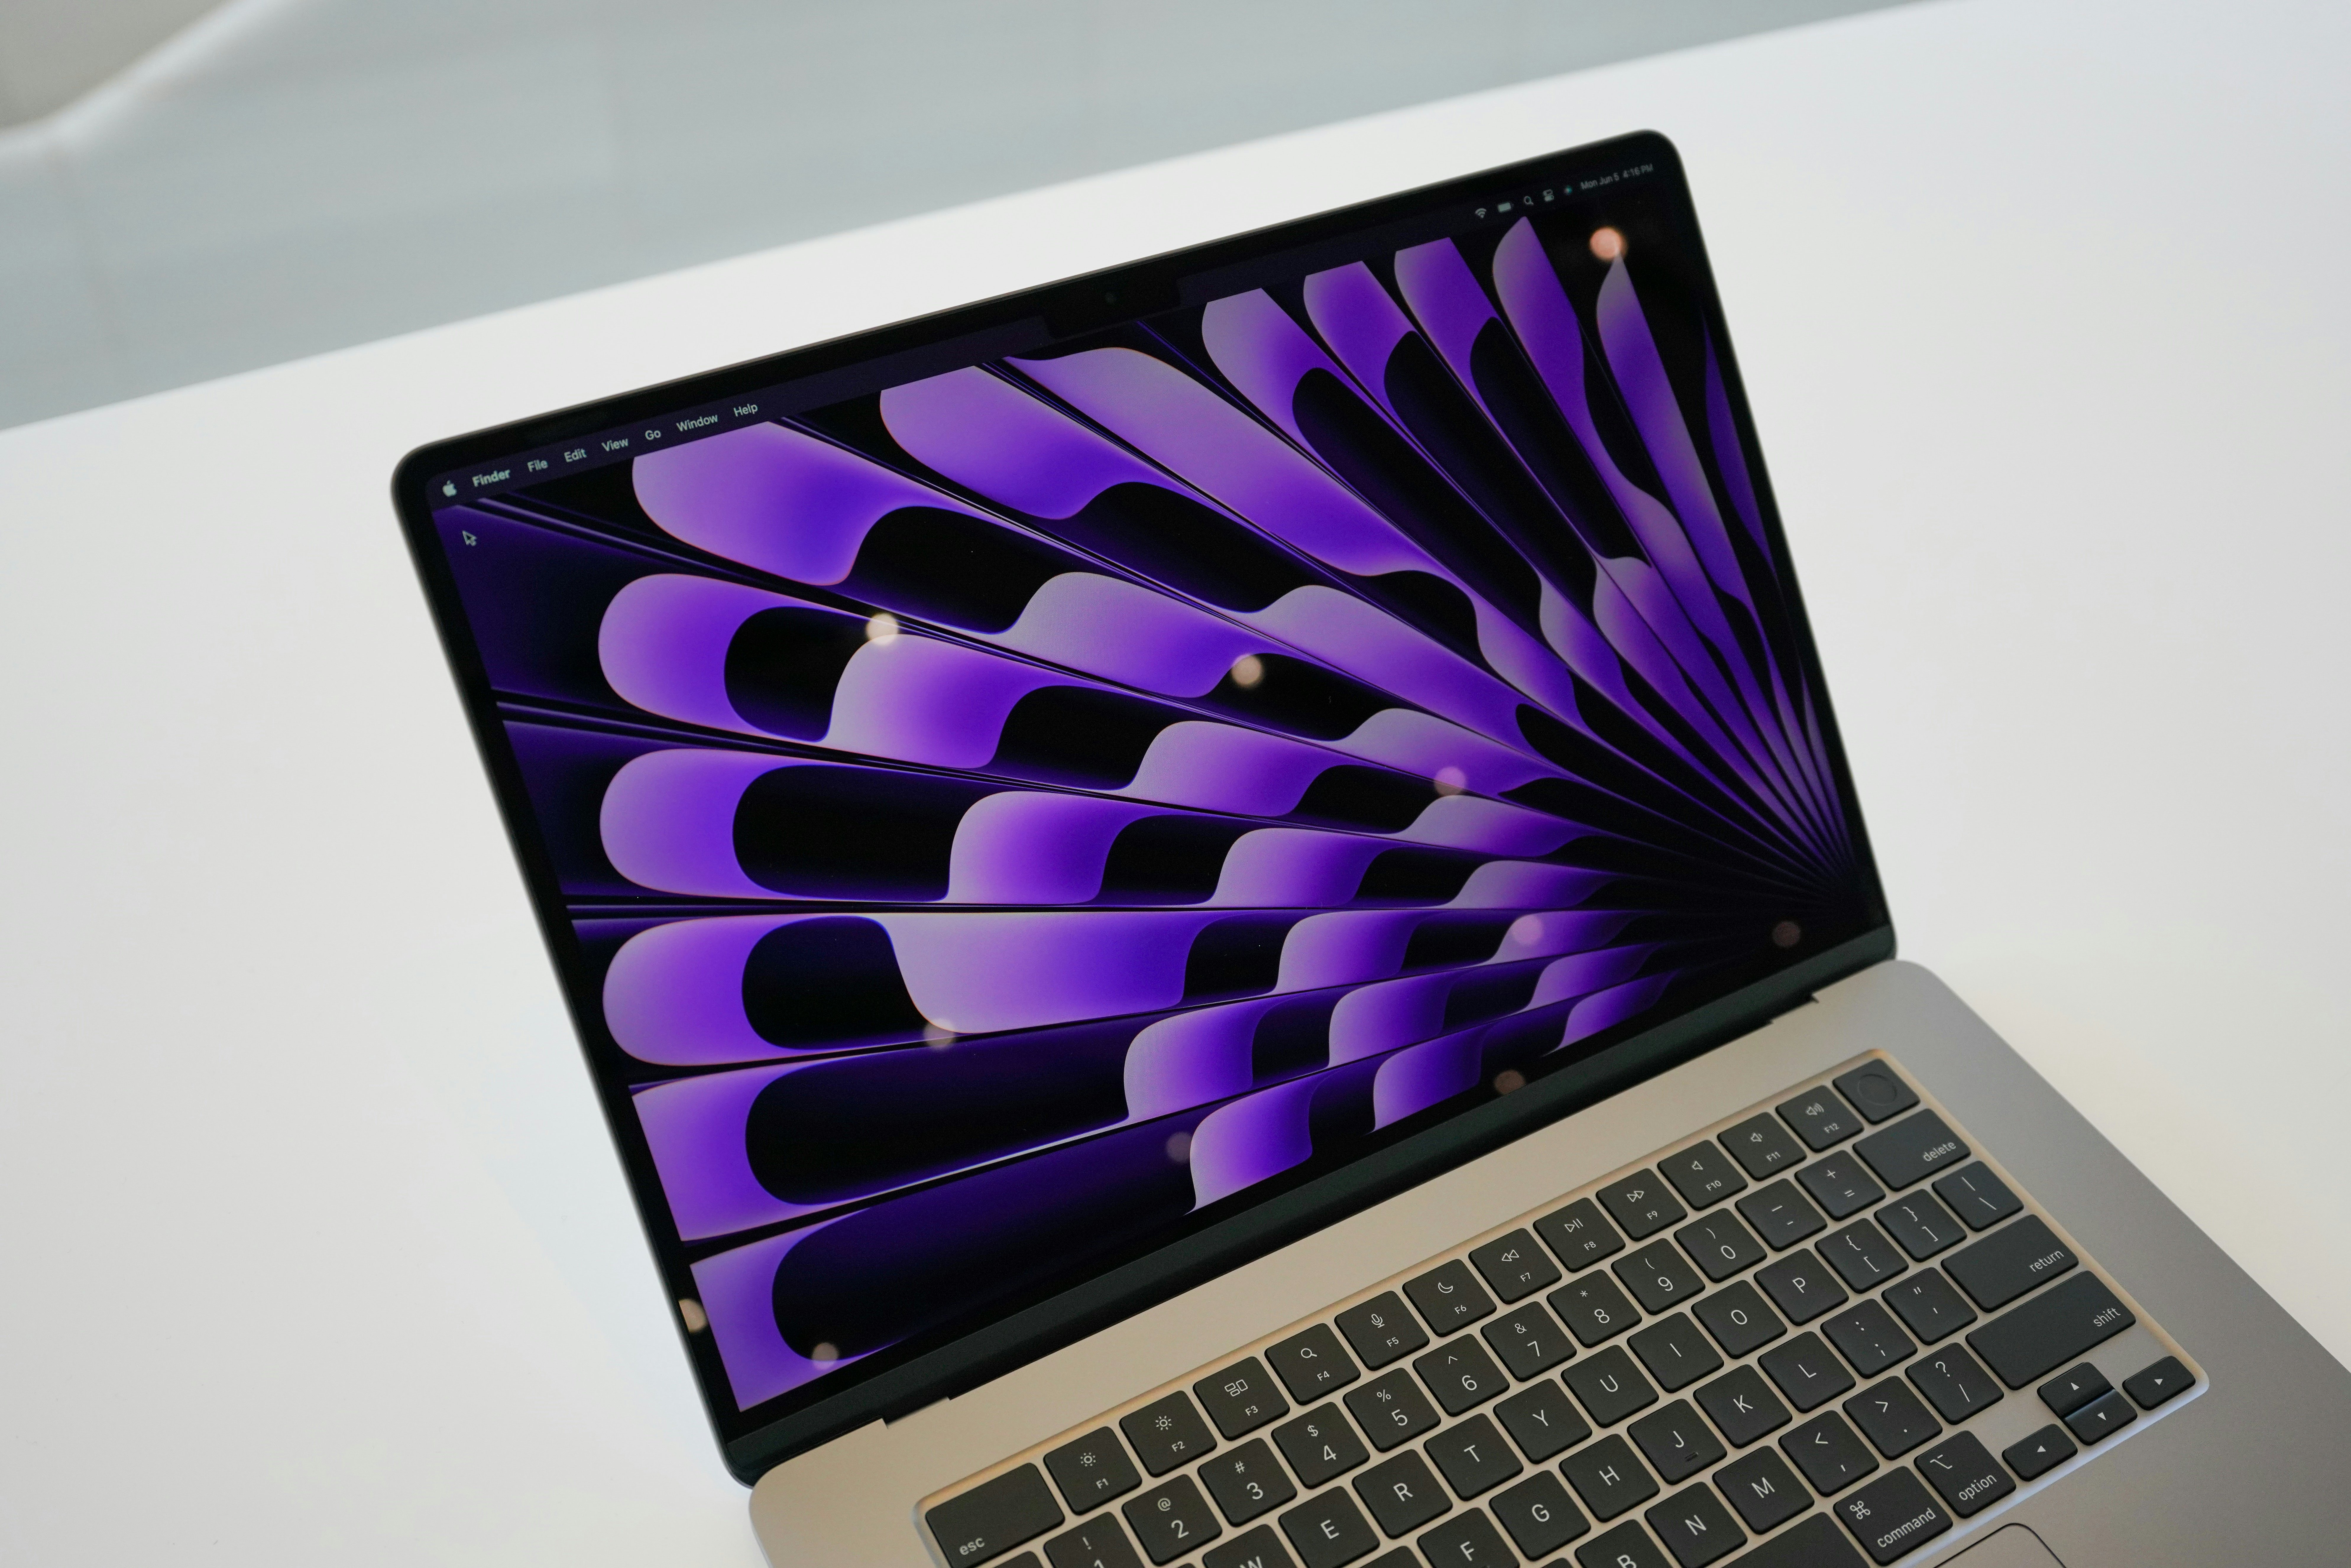 Apple Macbook M3 launch reportedly delayed: Expected release date